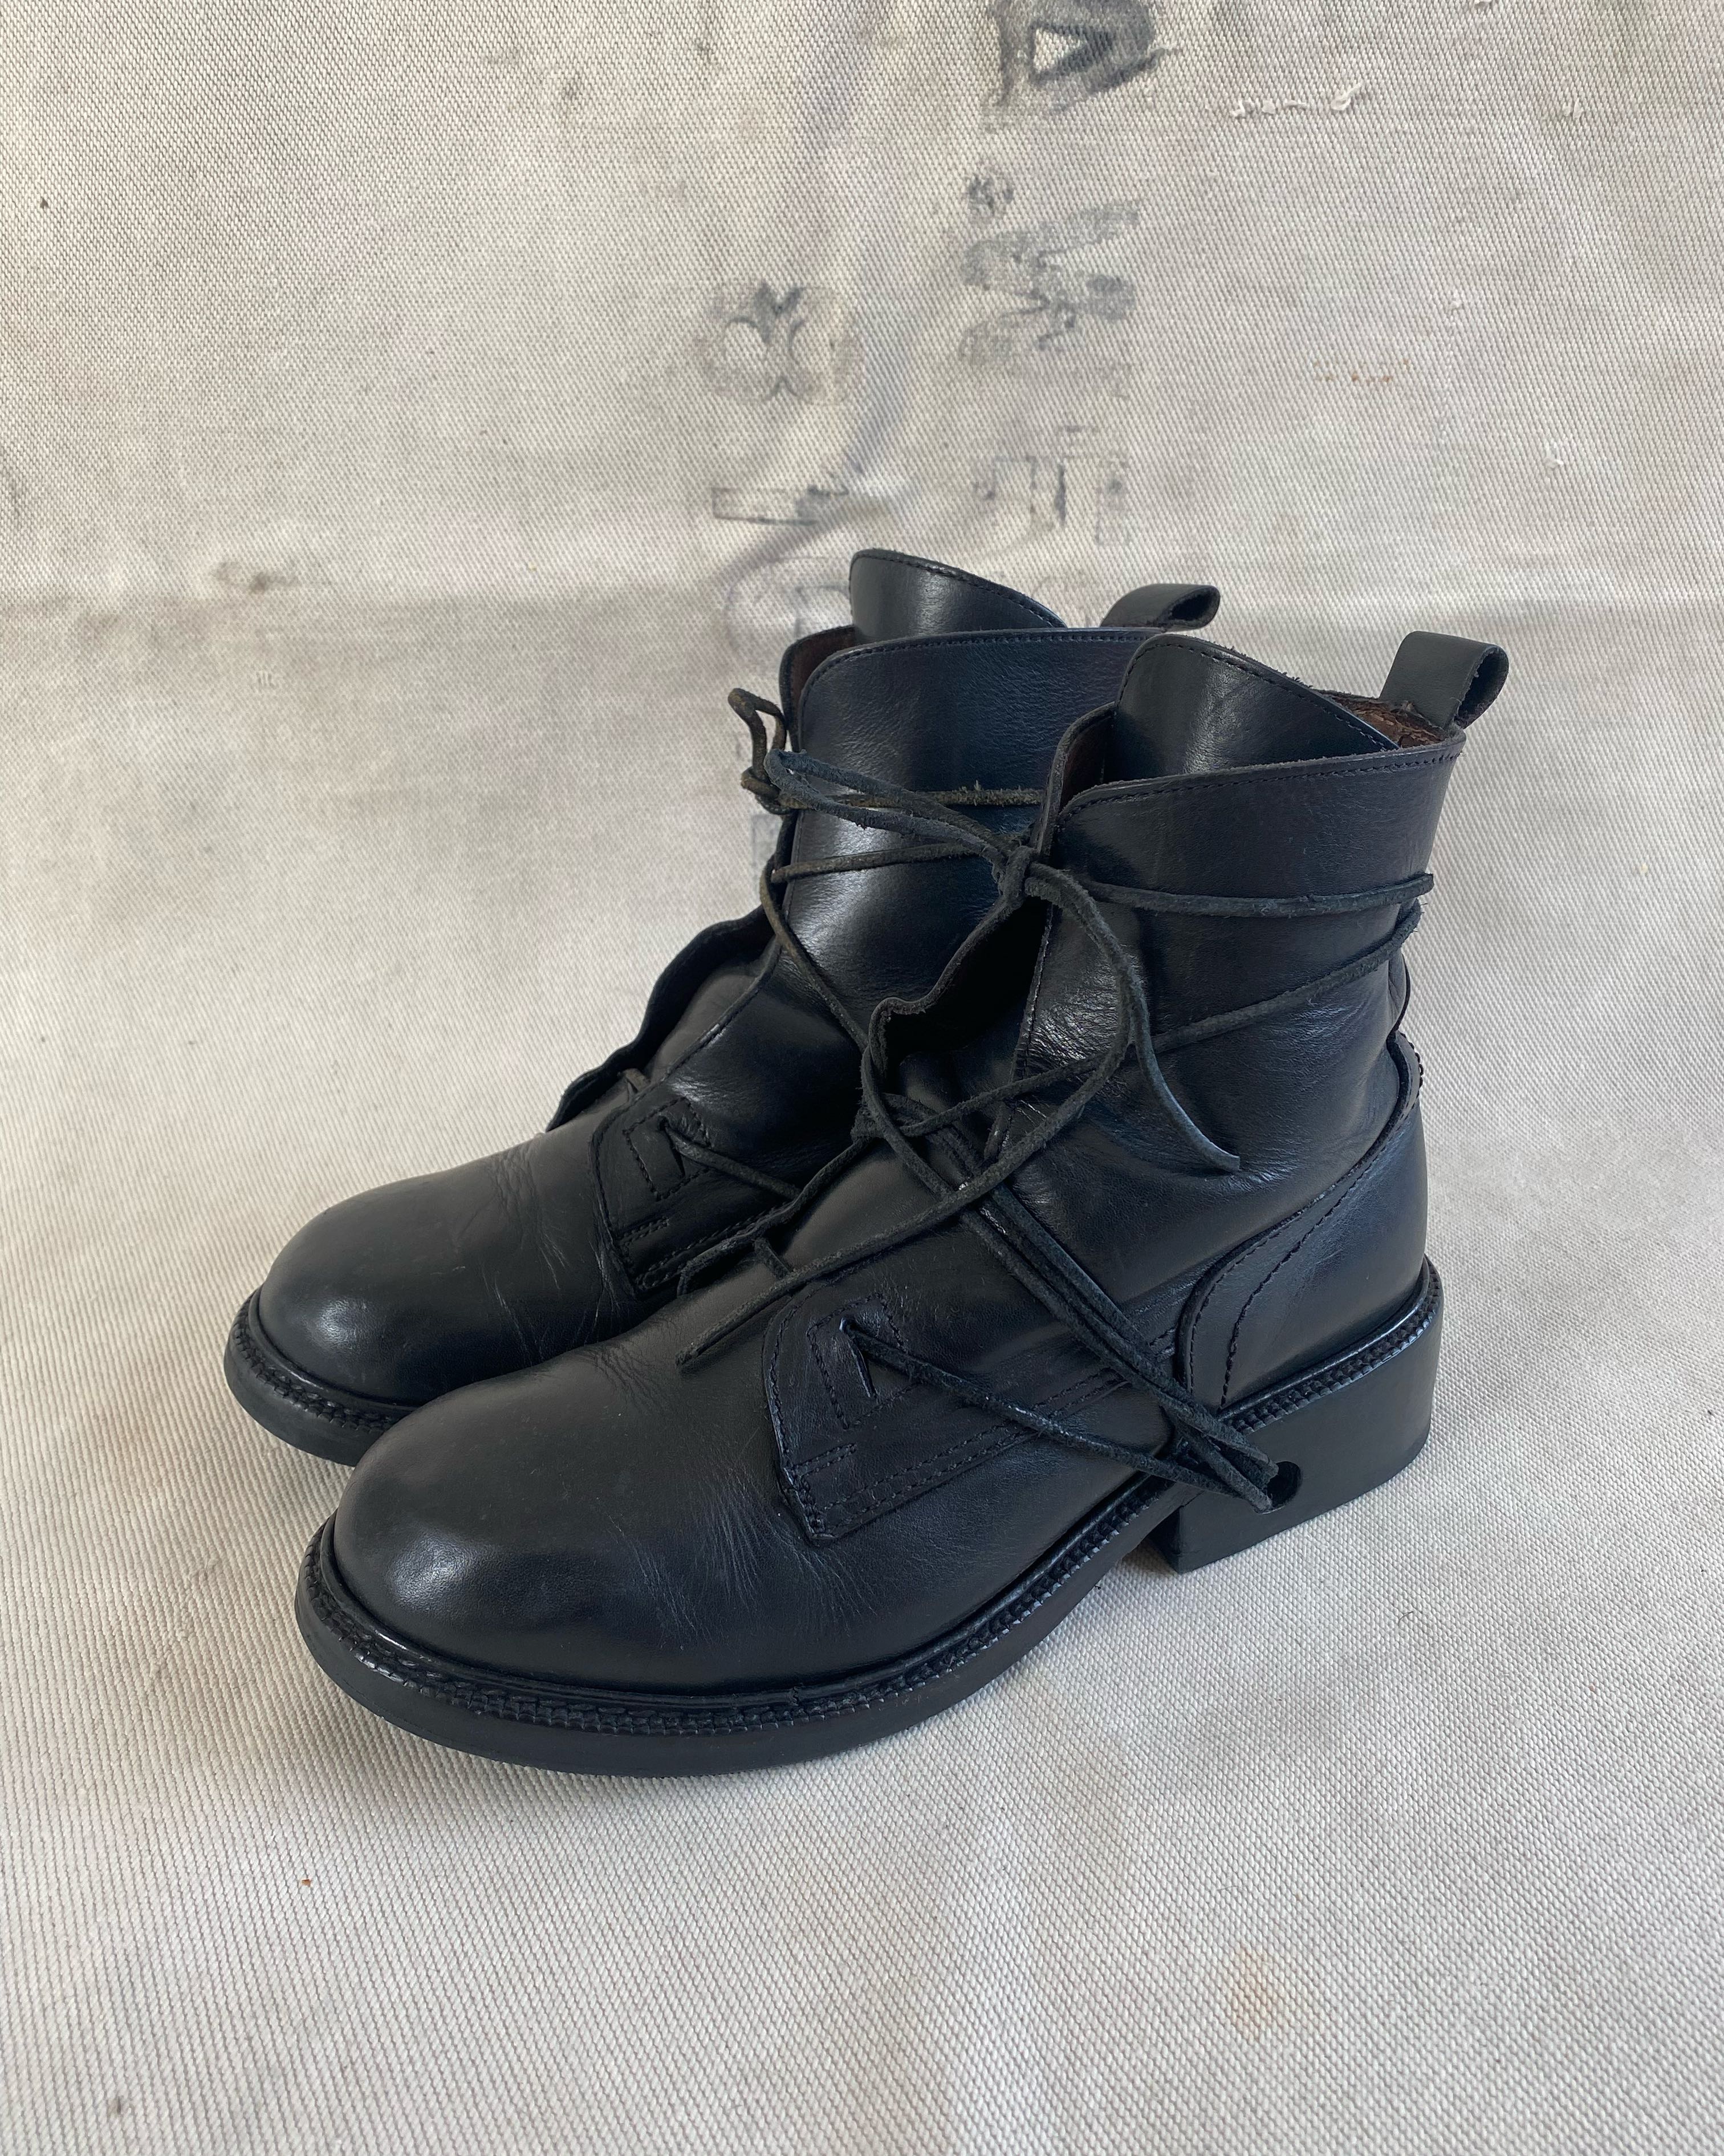 Dirk Bikkembergs 90s Archive Boots - 1